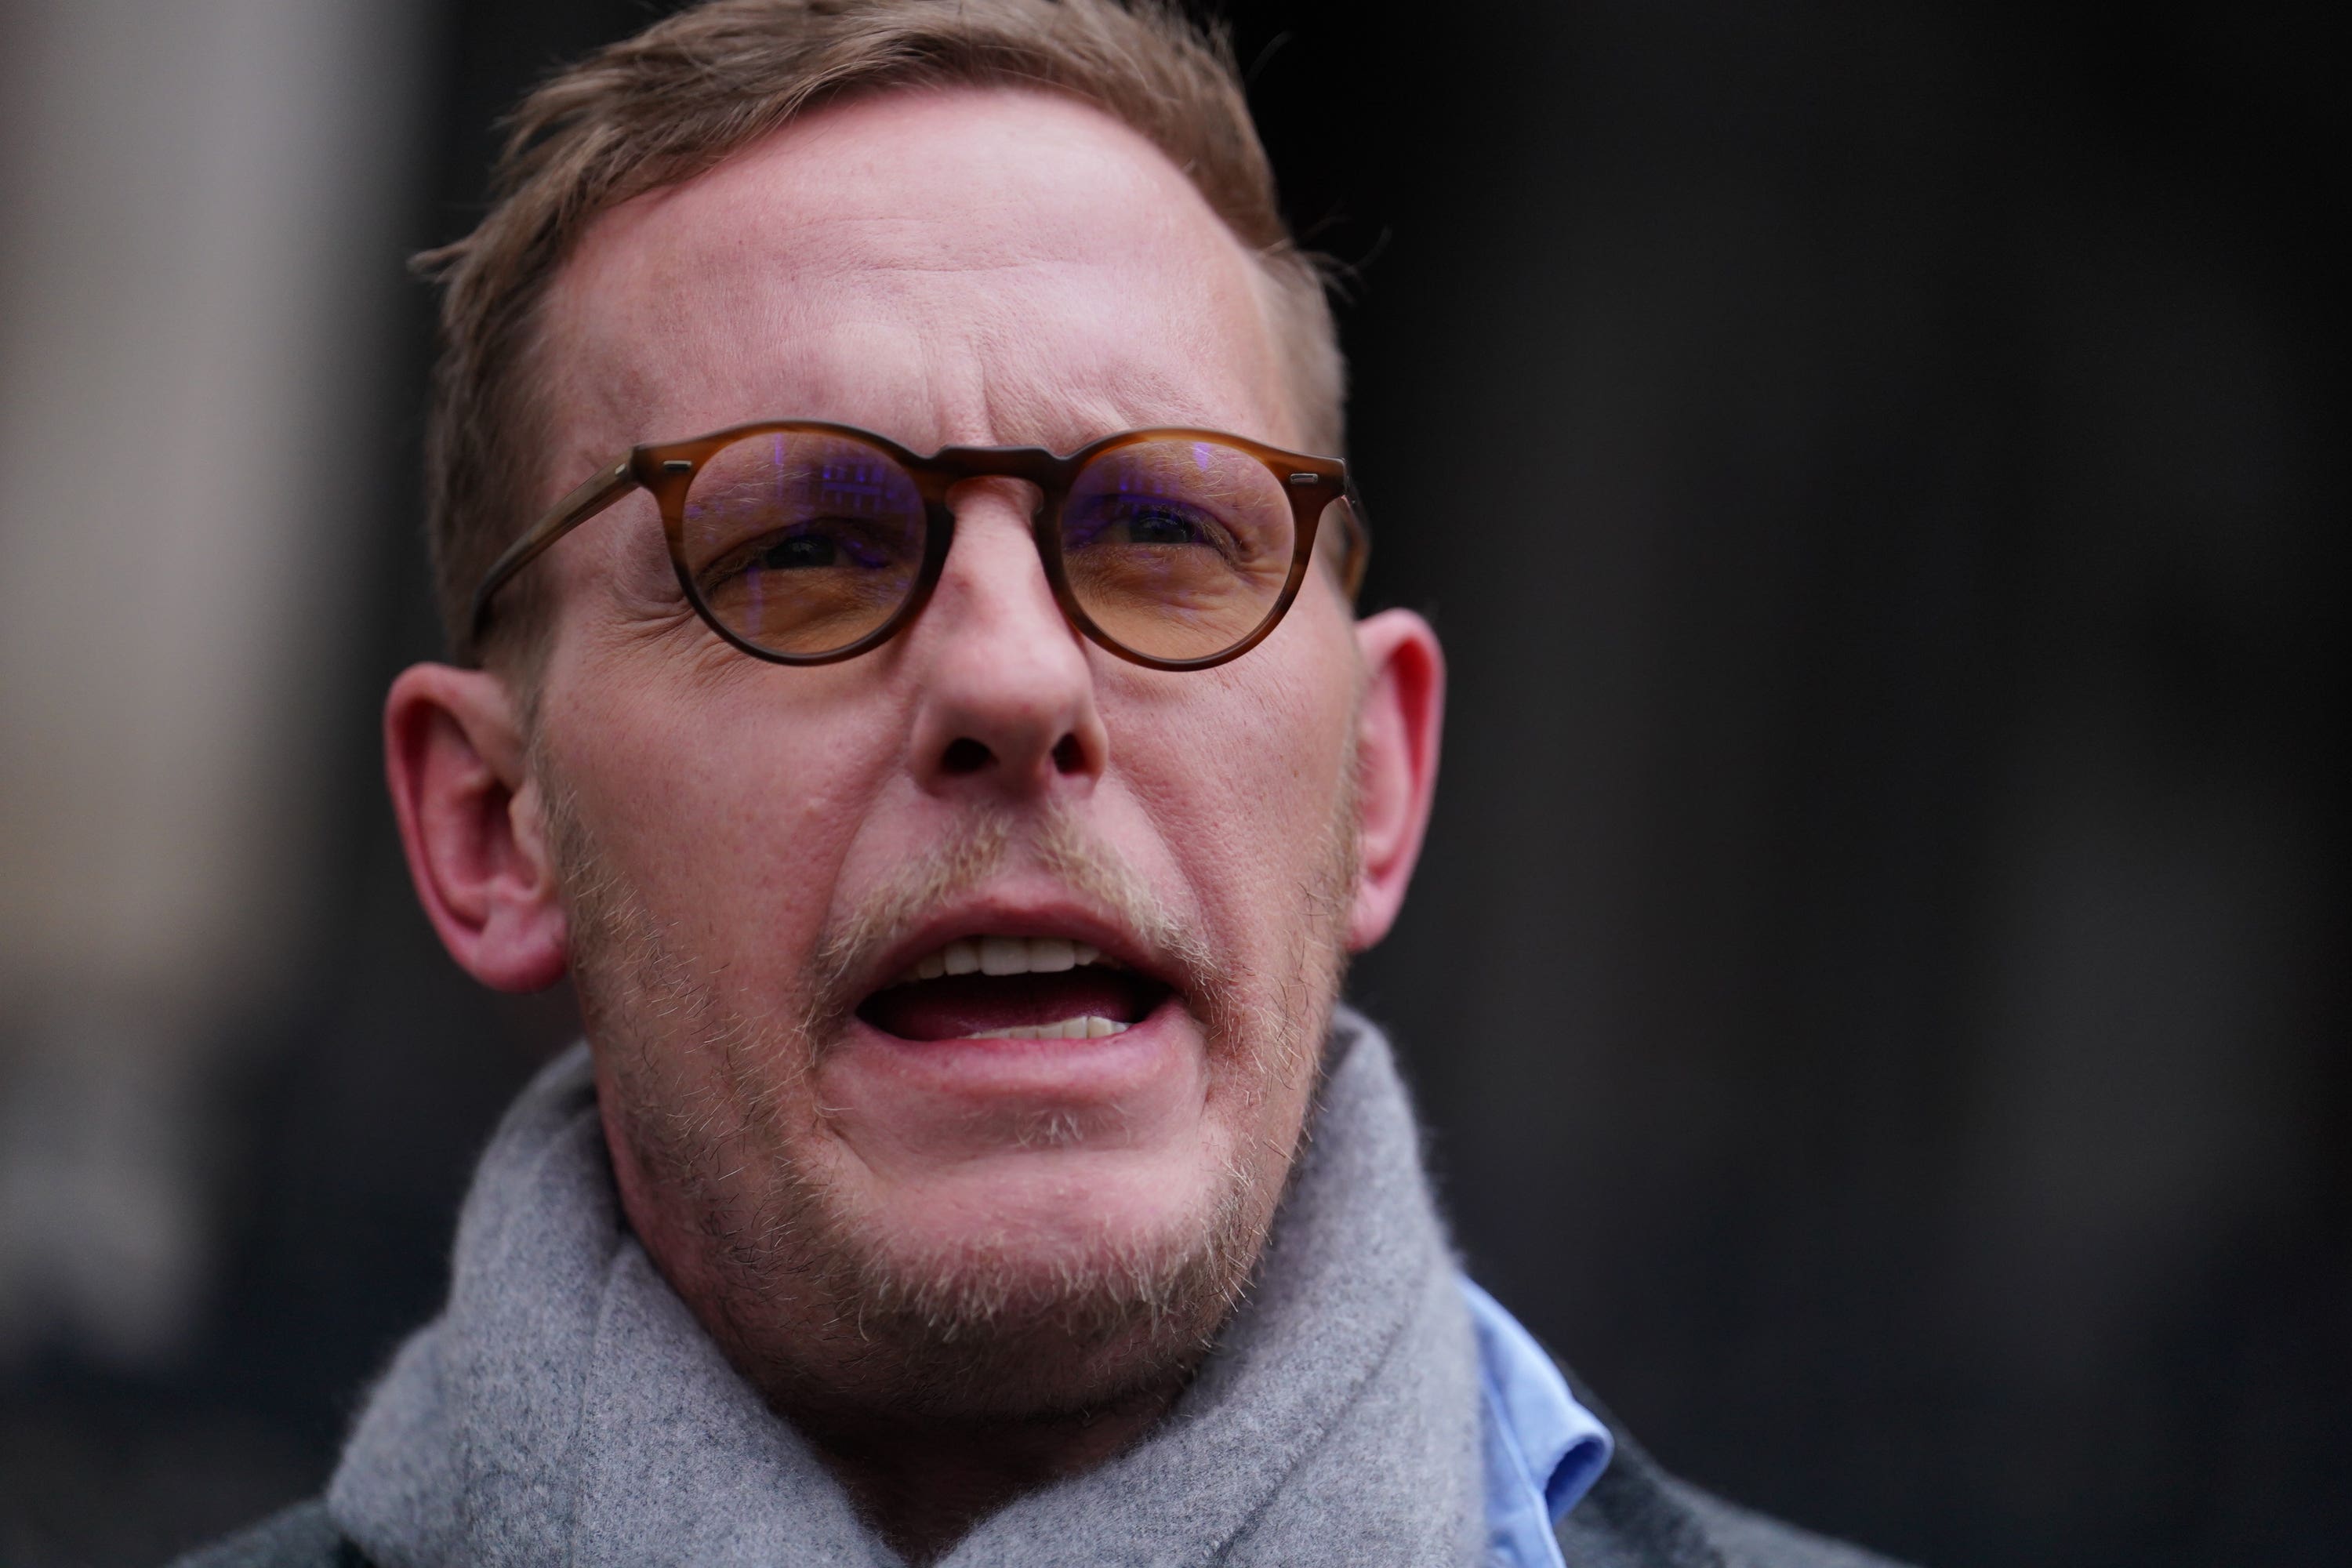 On Monday, Ofcom ruled that Laurence Fox’s ‘misogynistic’ comments on GB News broke broadcasting rules that protect ‘viewers from offensive content’